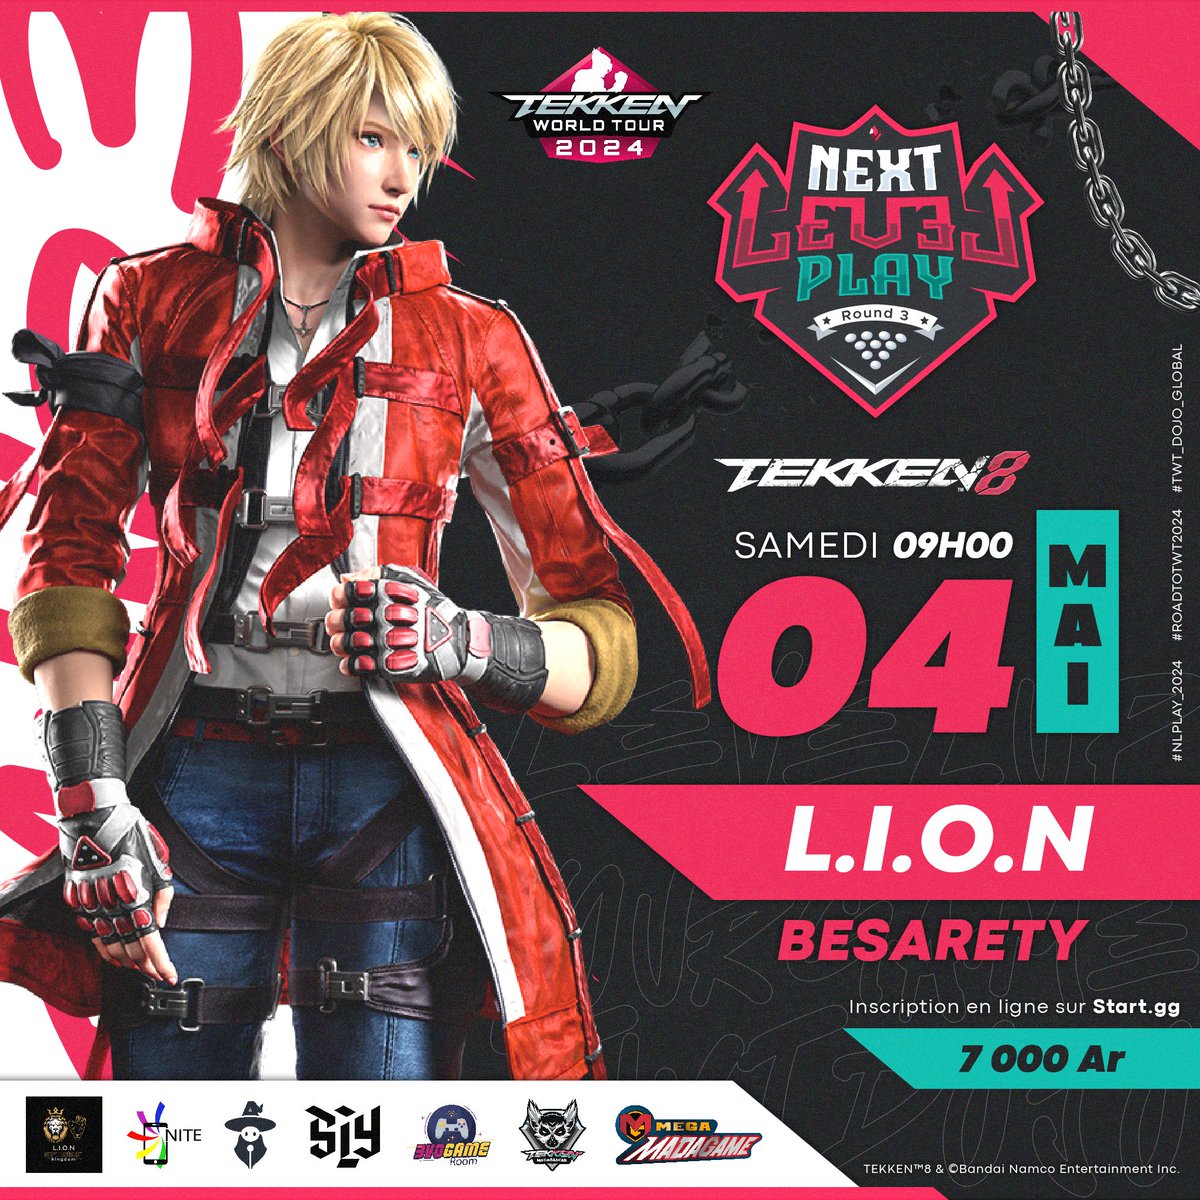 Get Ready for the 𝐍𝐄𝐗𝐓 𝐋𝐄𝐕𝐄𝐋 𝐏𝐋𝐀𝐘 Round 3 ! #Level_Up_Your_Game 
The 2nd #TWT2024 Dojo Event in Madagascar ! 

Prove yourself that you're at the top level ! All details and registration here 👇 
start.gg/tournament/the…
Let's Go !  

#Tekken8 #madagascar_ranking